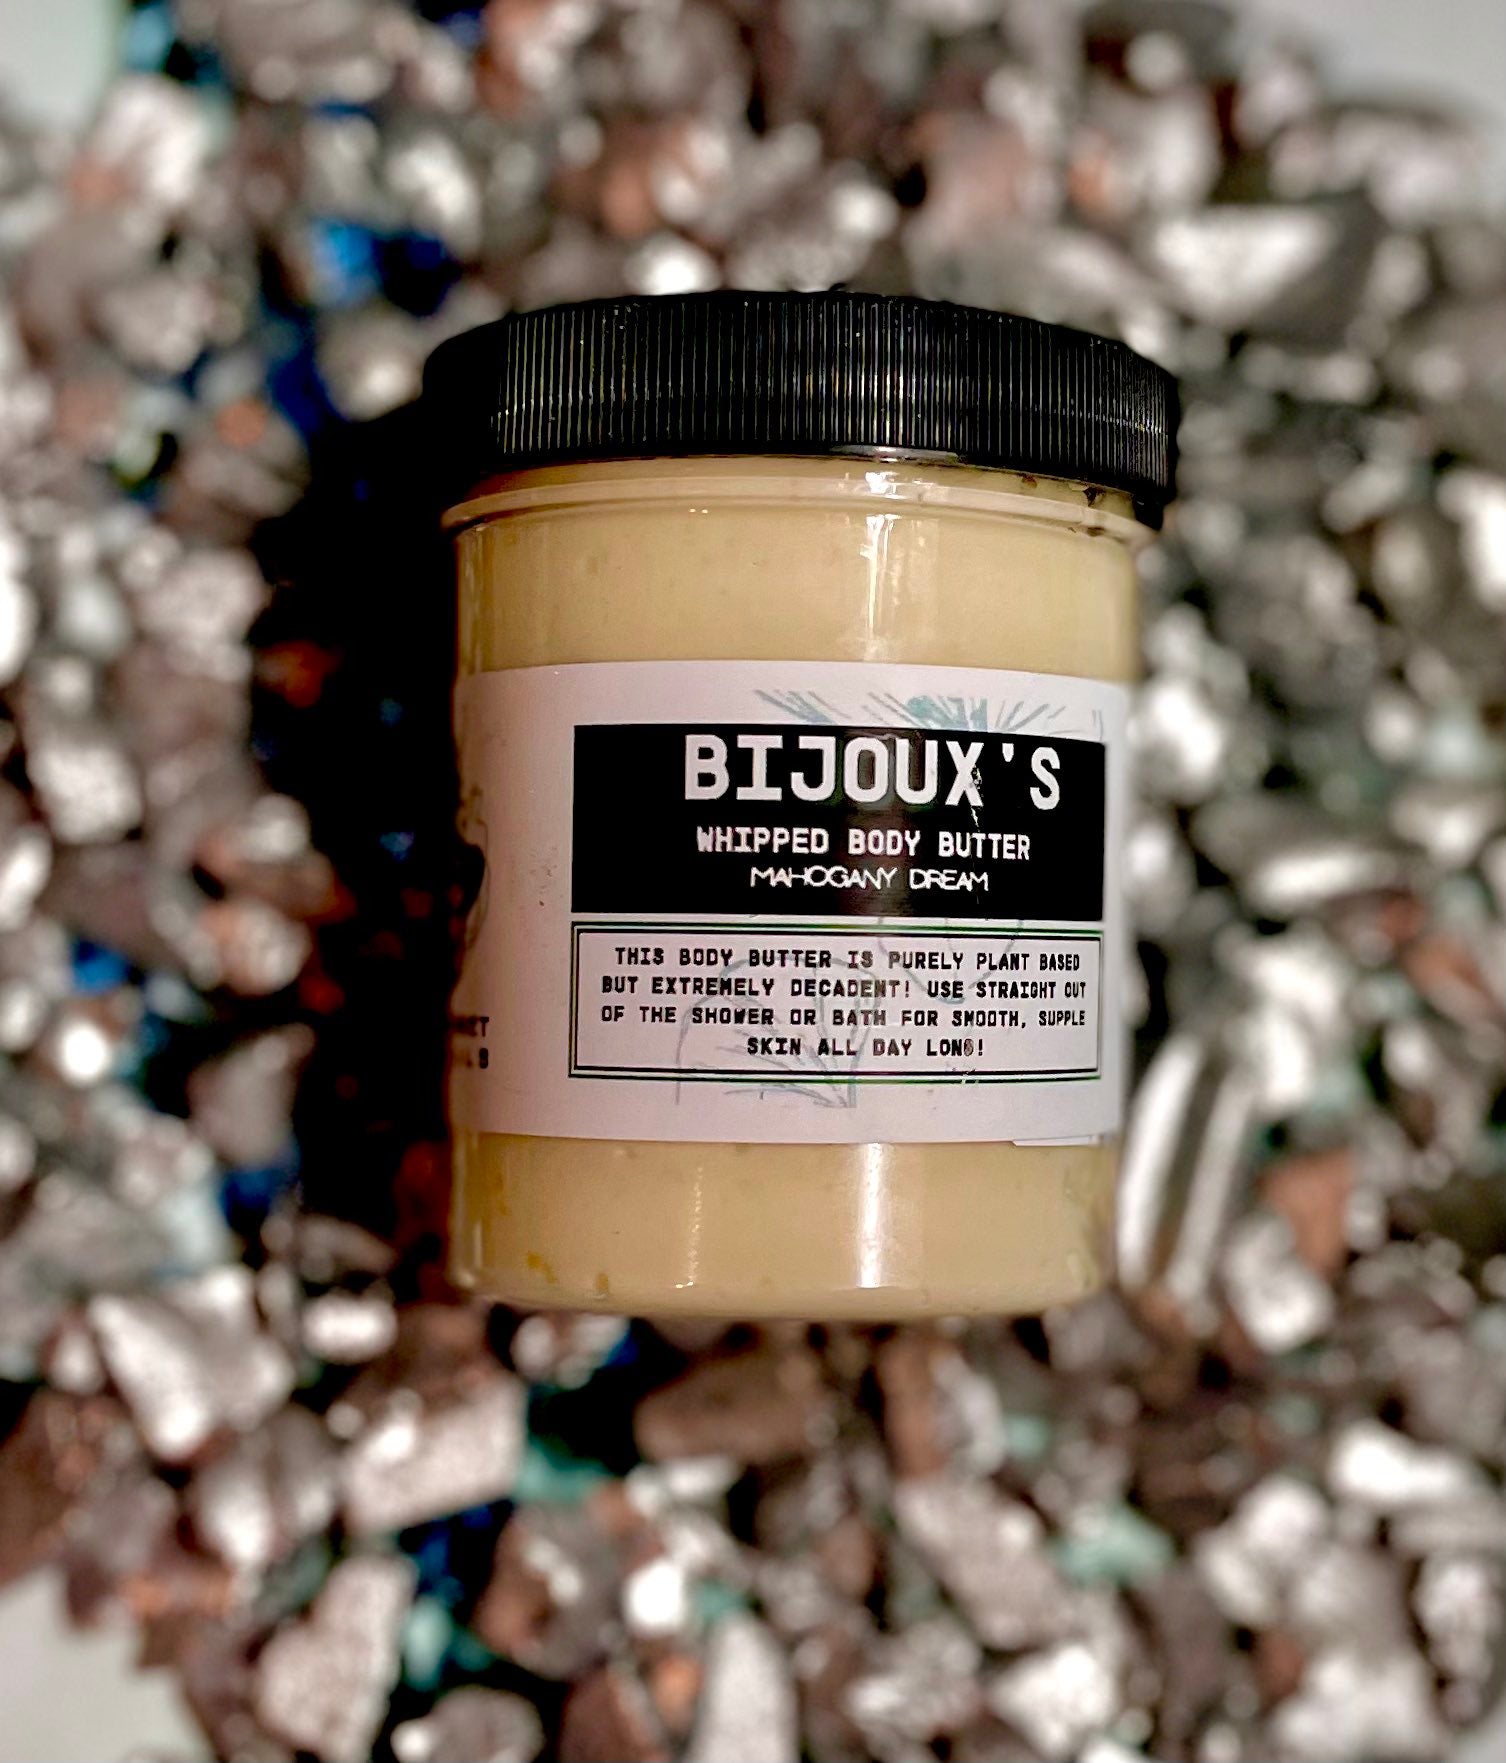 Bijoux's Whipped Body Butter